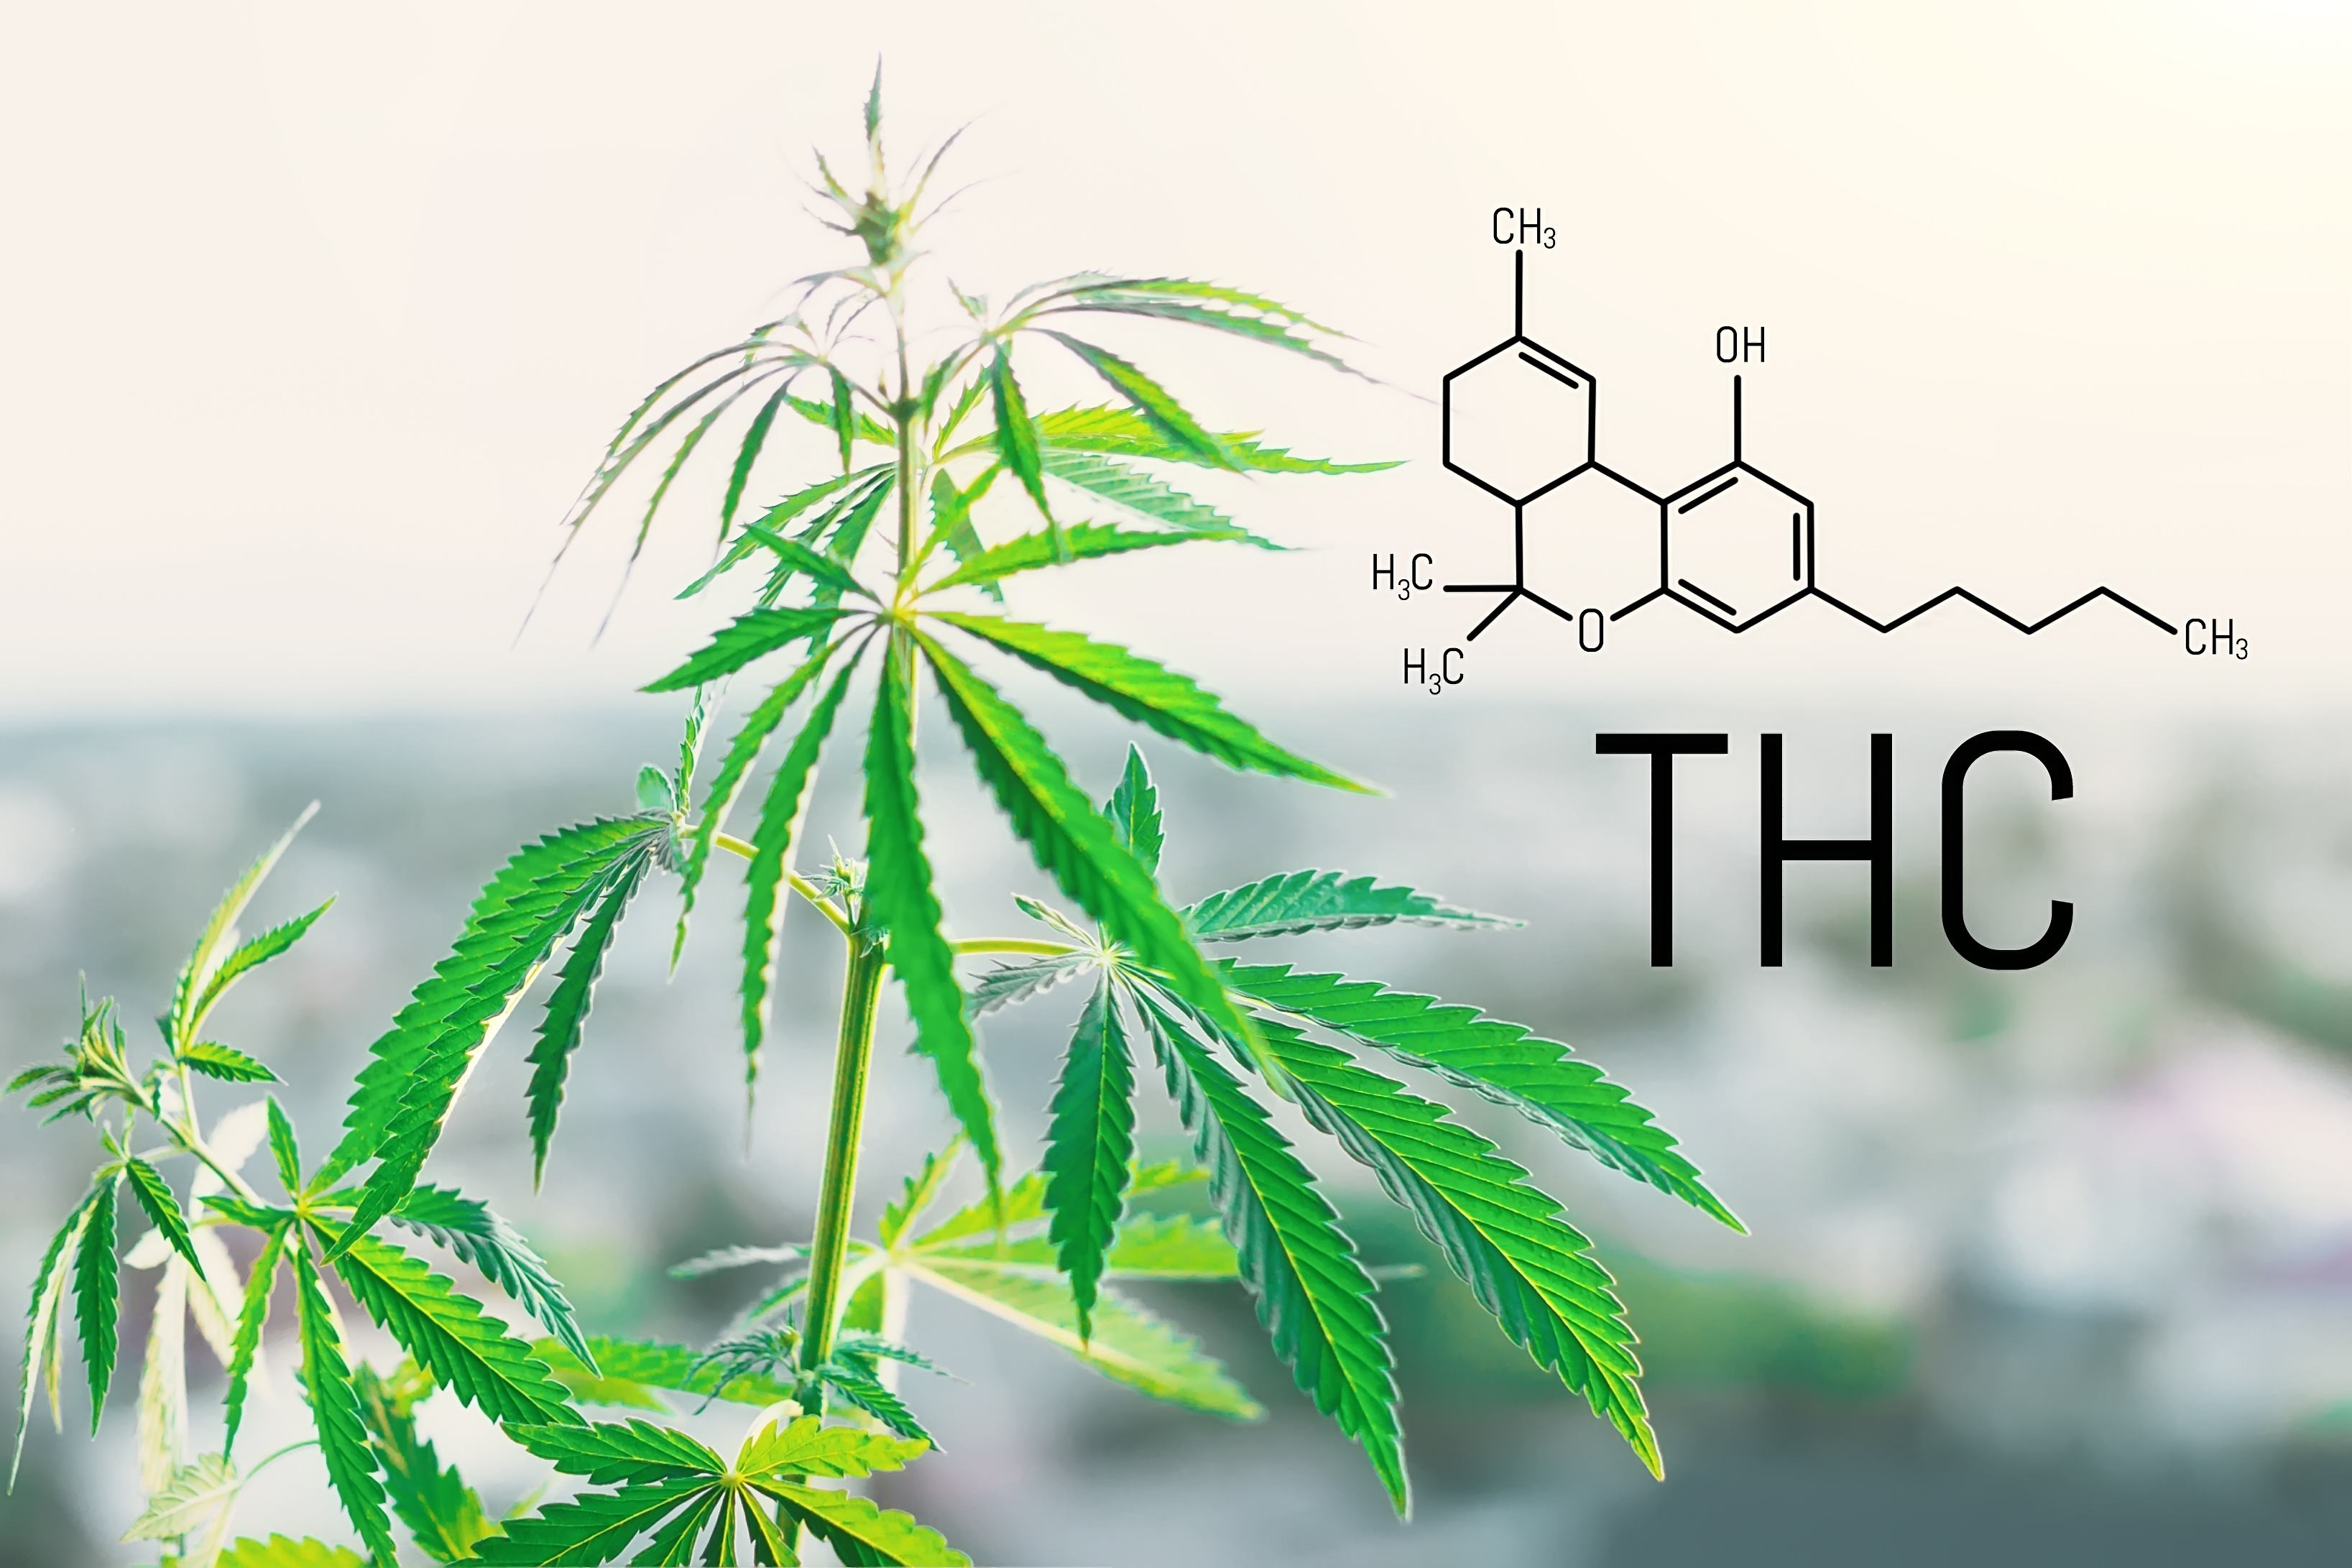 Image of the Delta 8 THC molecule next to a cannabis plant.